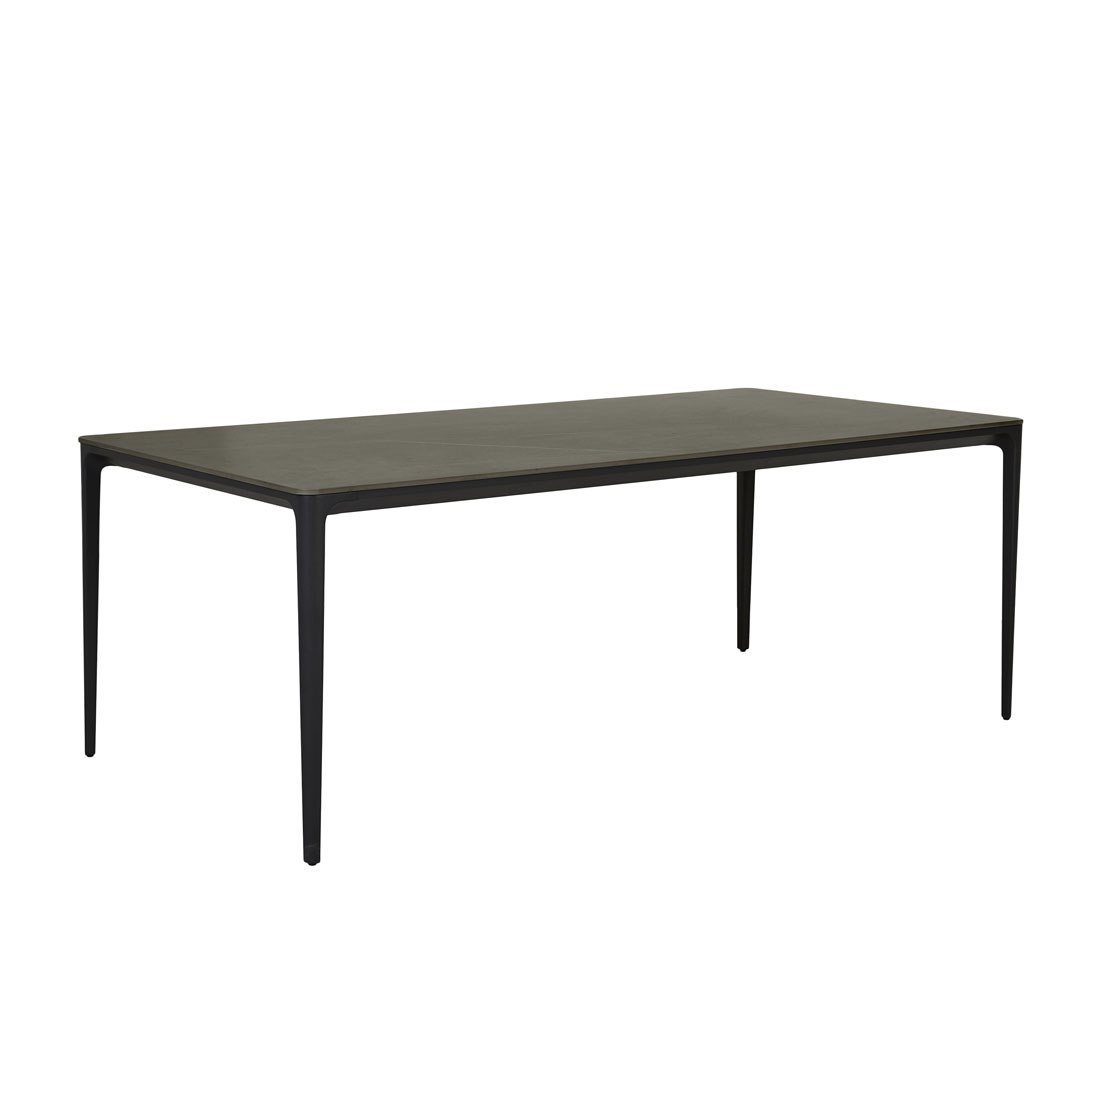 Portsea Classic Dining Tables image 6